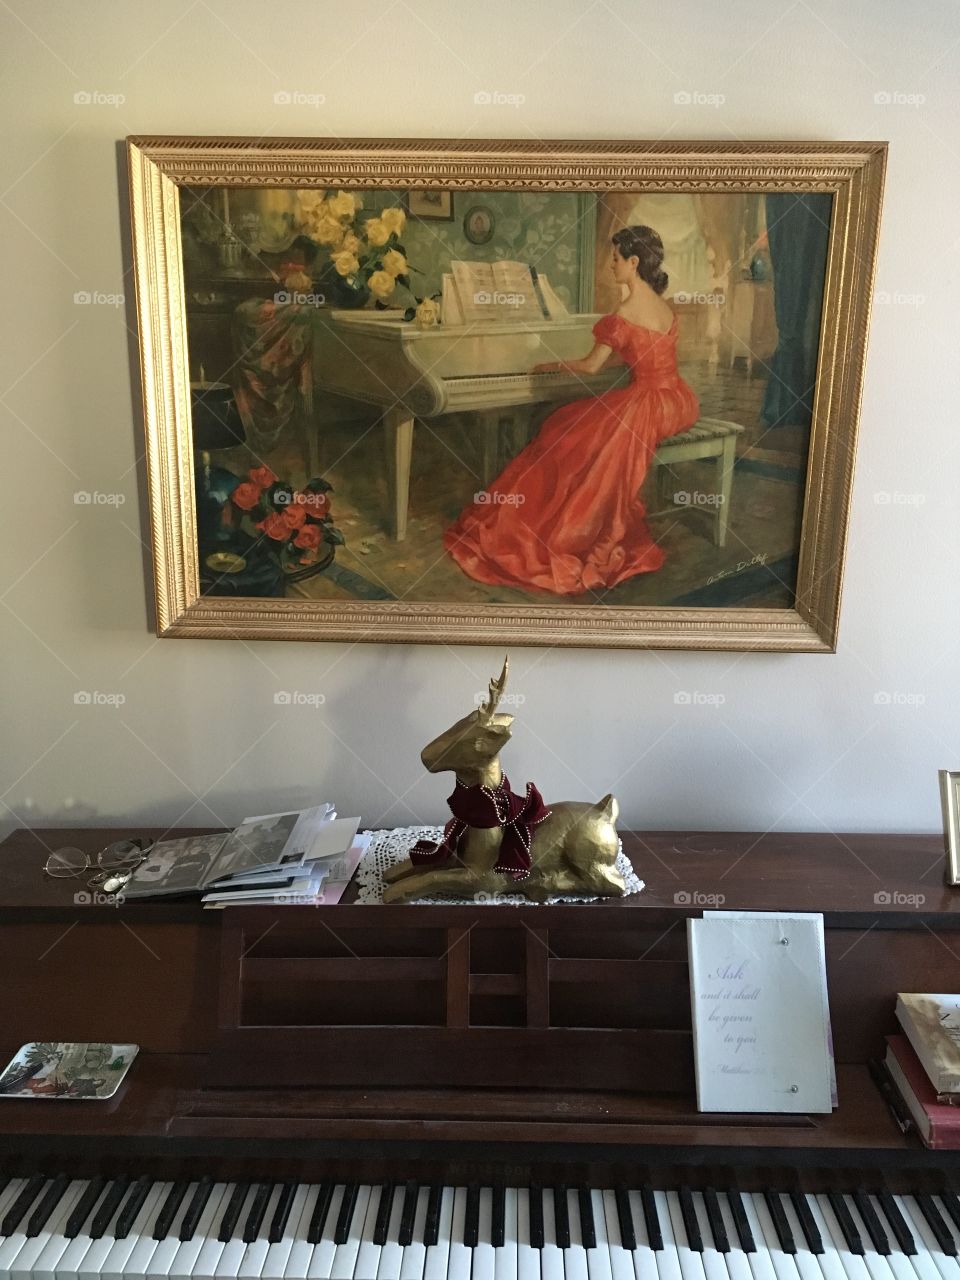 An old grand piano covered in letters and papers with a golden reindeer decoration and a beautiful painting of a woman playing the piano surrounded by flowers